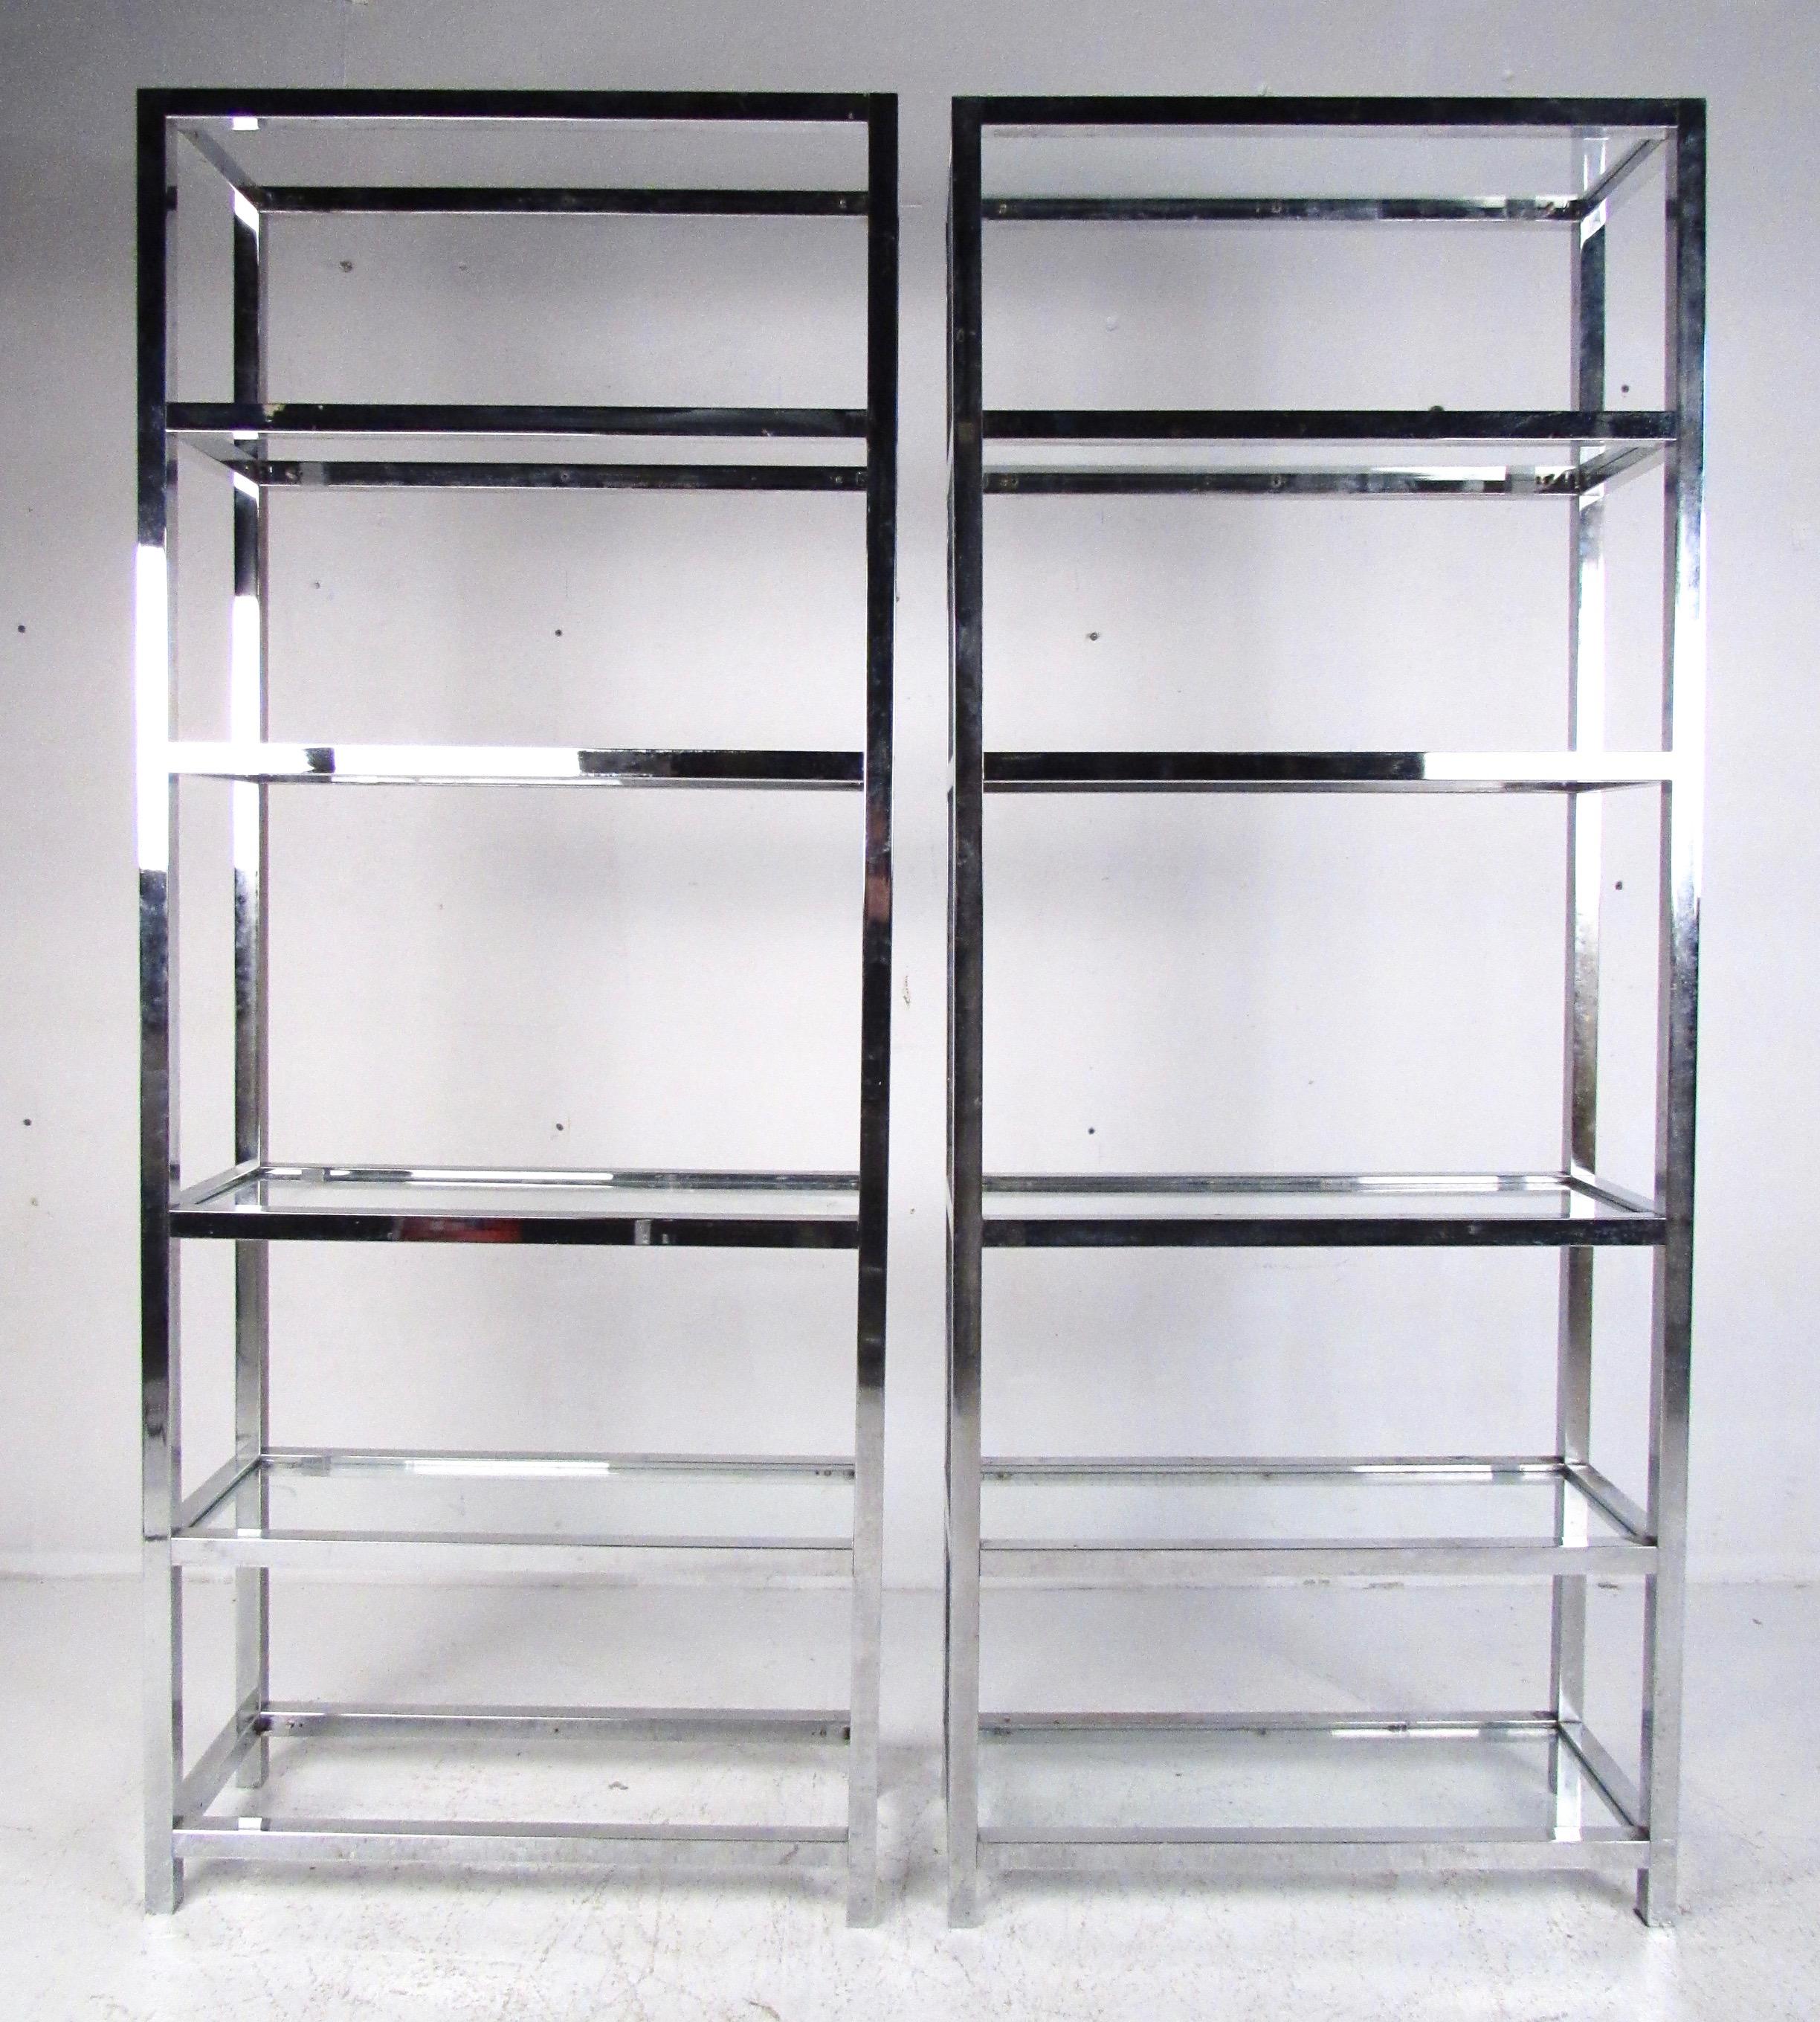 This stylish pair of vintage modern display shelves make a striking Mid-Century Modern addition to home or business display. Each unit has five glass shelves for storage or display set in heavy chrome finish frame. Please confirm item location (NY